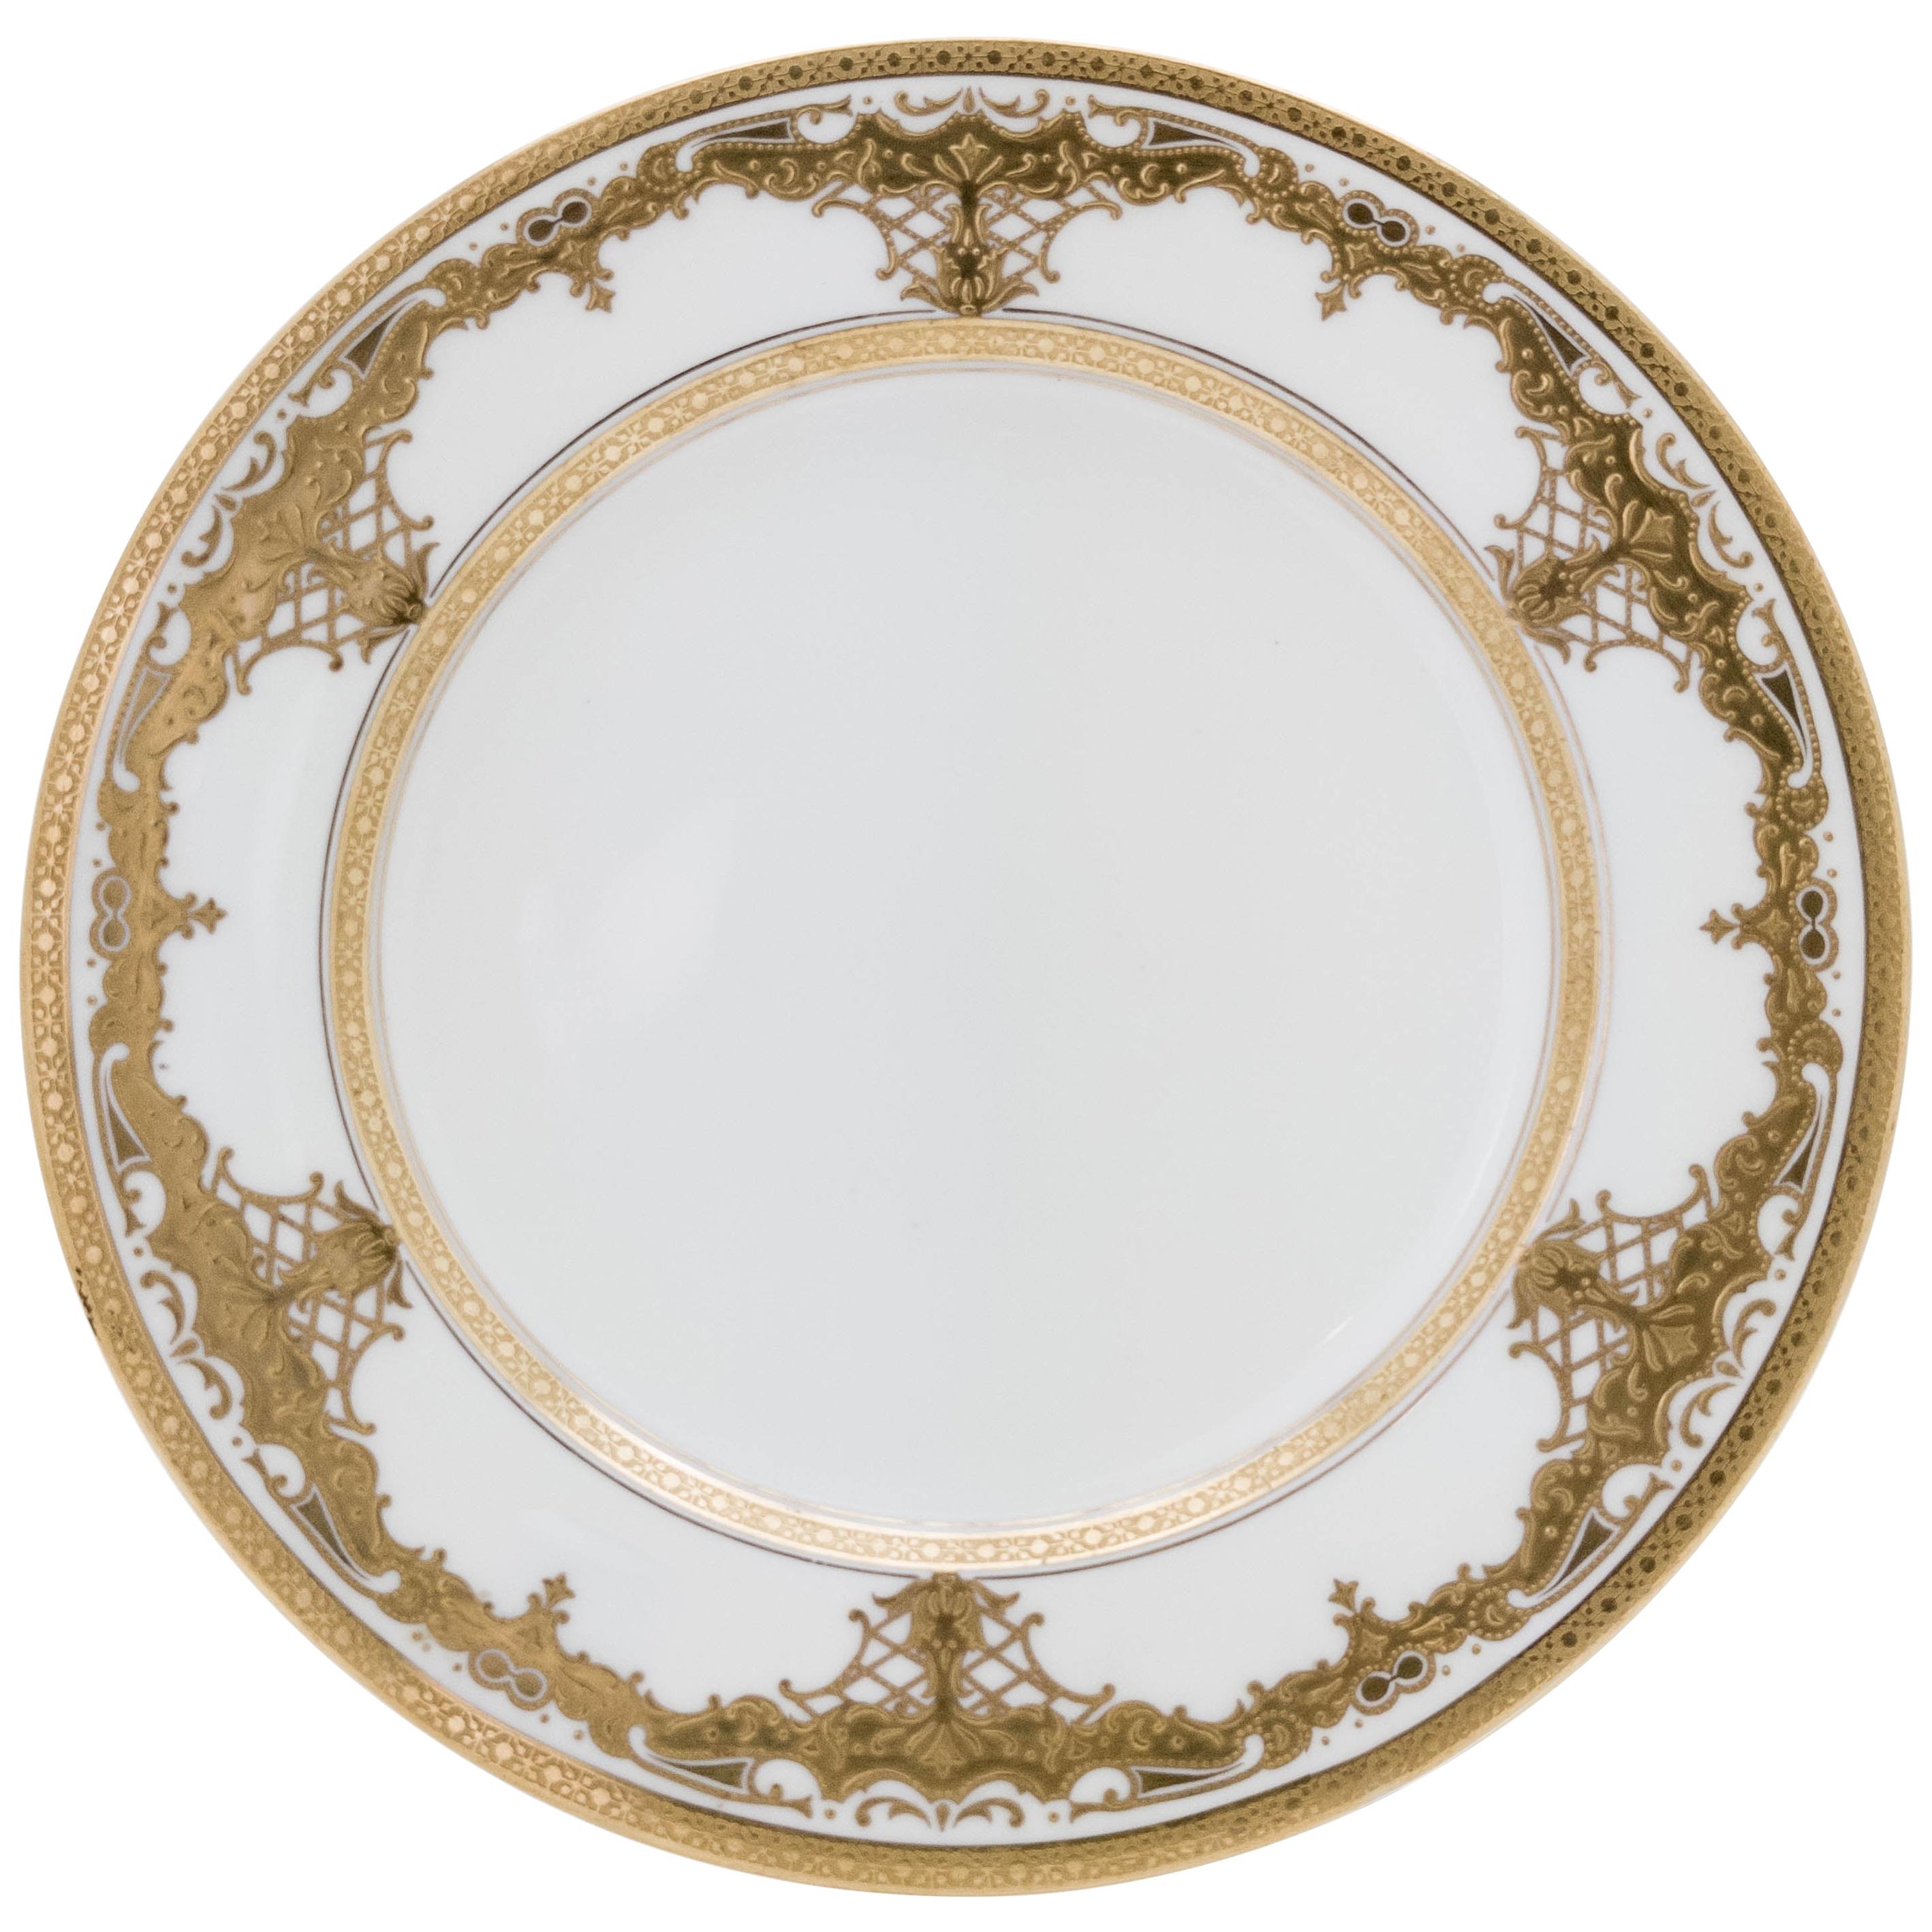 8  Tiffany White and Gold Gilt Encrusted Dessert Plates, Antique English 